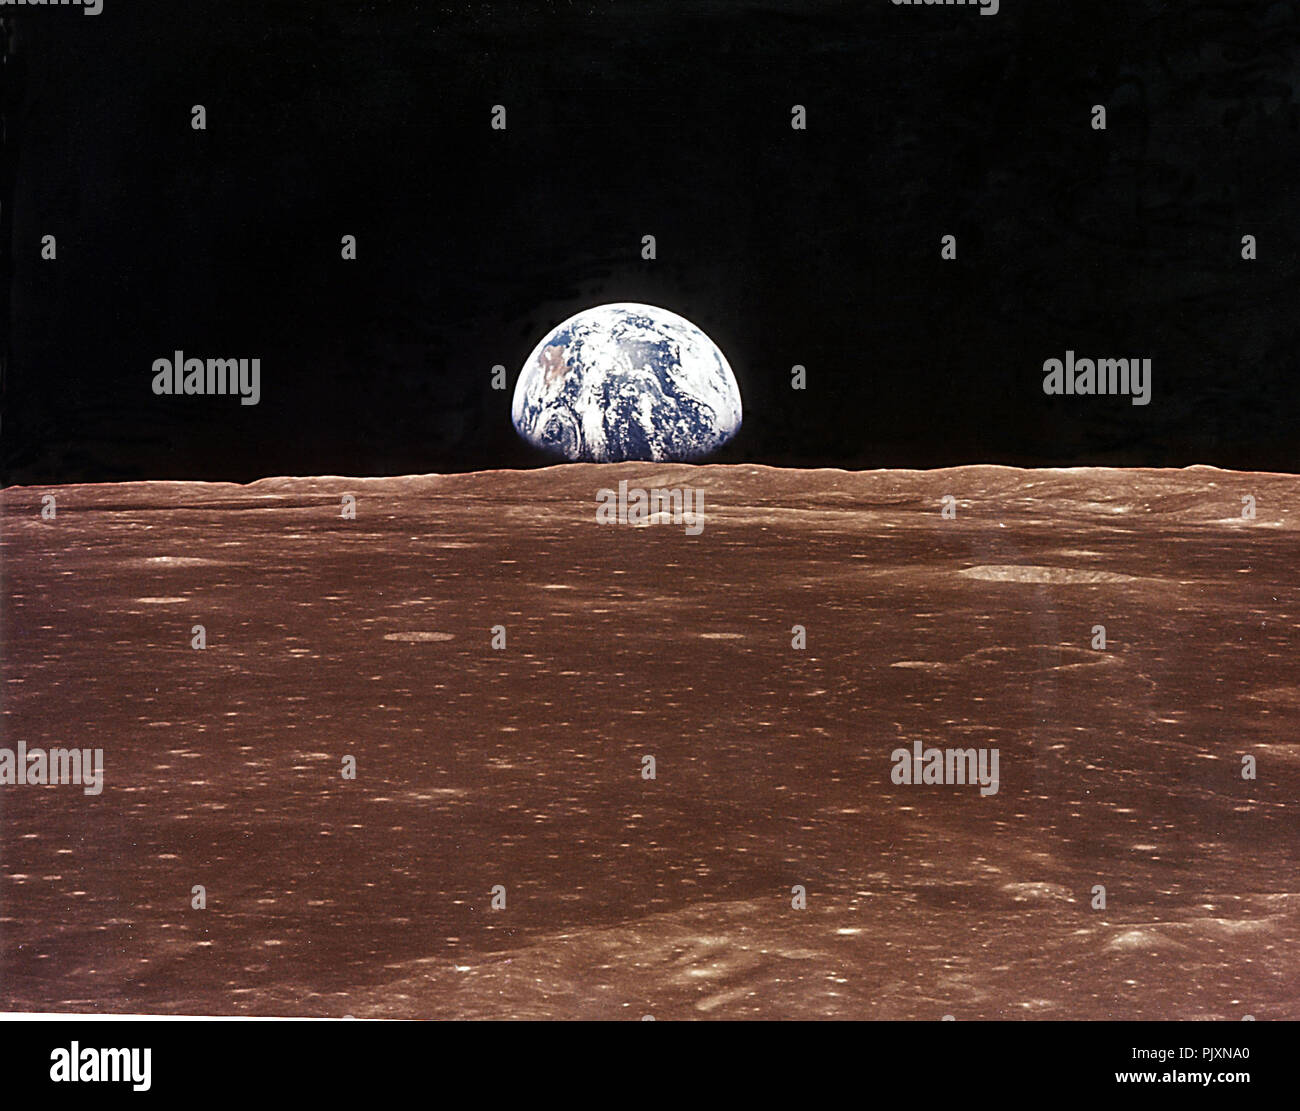 In Lunar Orbit - (FILE) -- This view of the rising Earth greeted the Apollo 11 astronauts as they came from behind the Moon after the lunar orbit insertion burn on Sunday, July 20, 1969.  Earth is just above the lunar horizon in this photograph.  The unnamed surface features in the foreground are near the eastern limb of the Moon as viewed from Earth.  Earth is 240,000 statute miles (386,242.56 km) away. Credit: NASA / CNP /MediaPunch Stock Photo